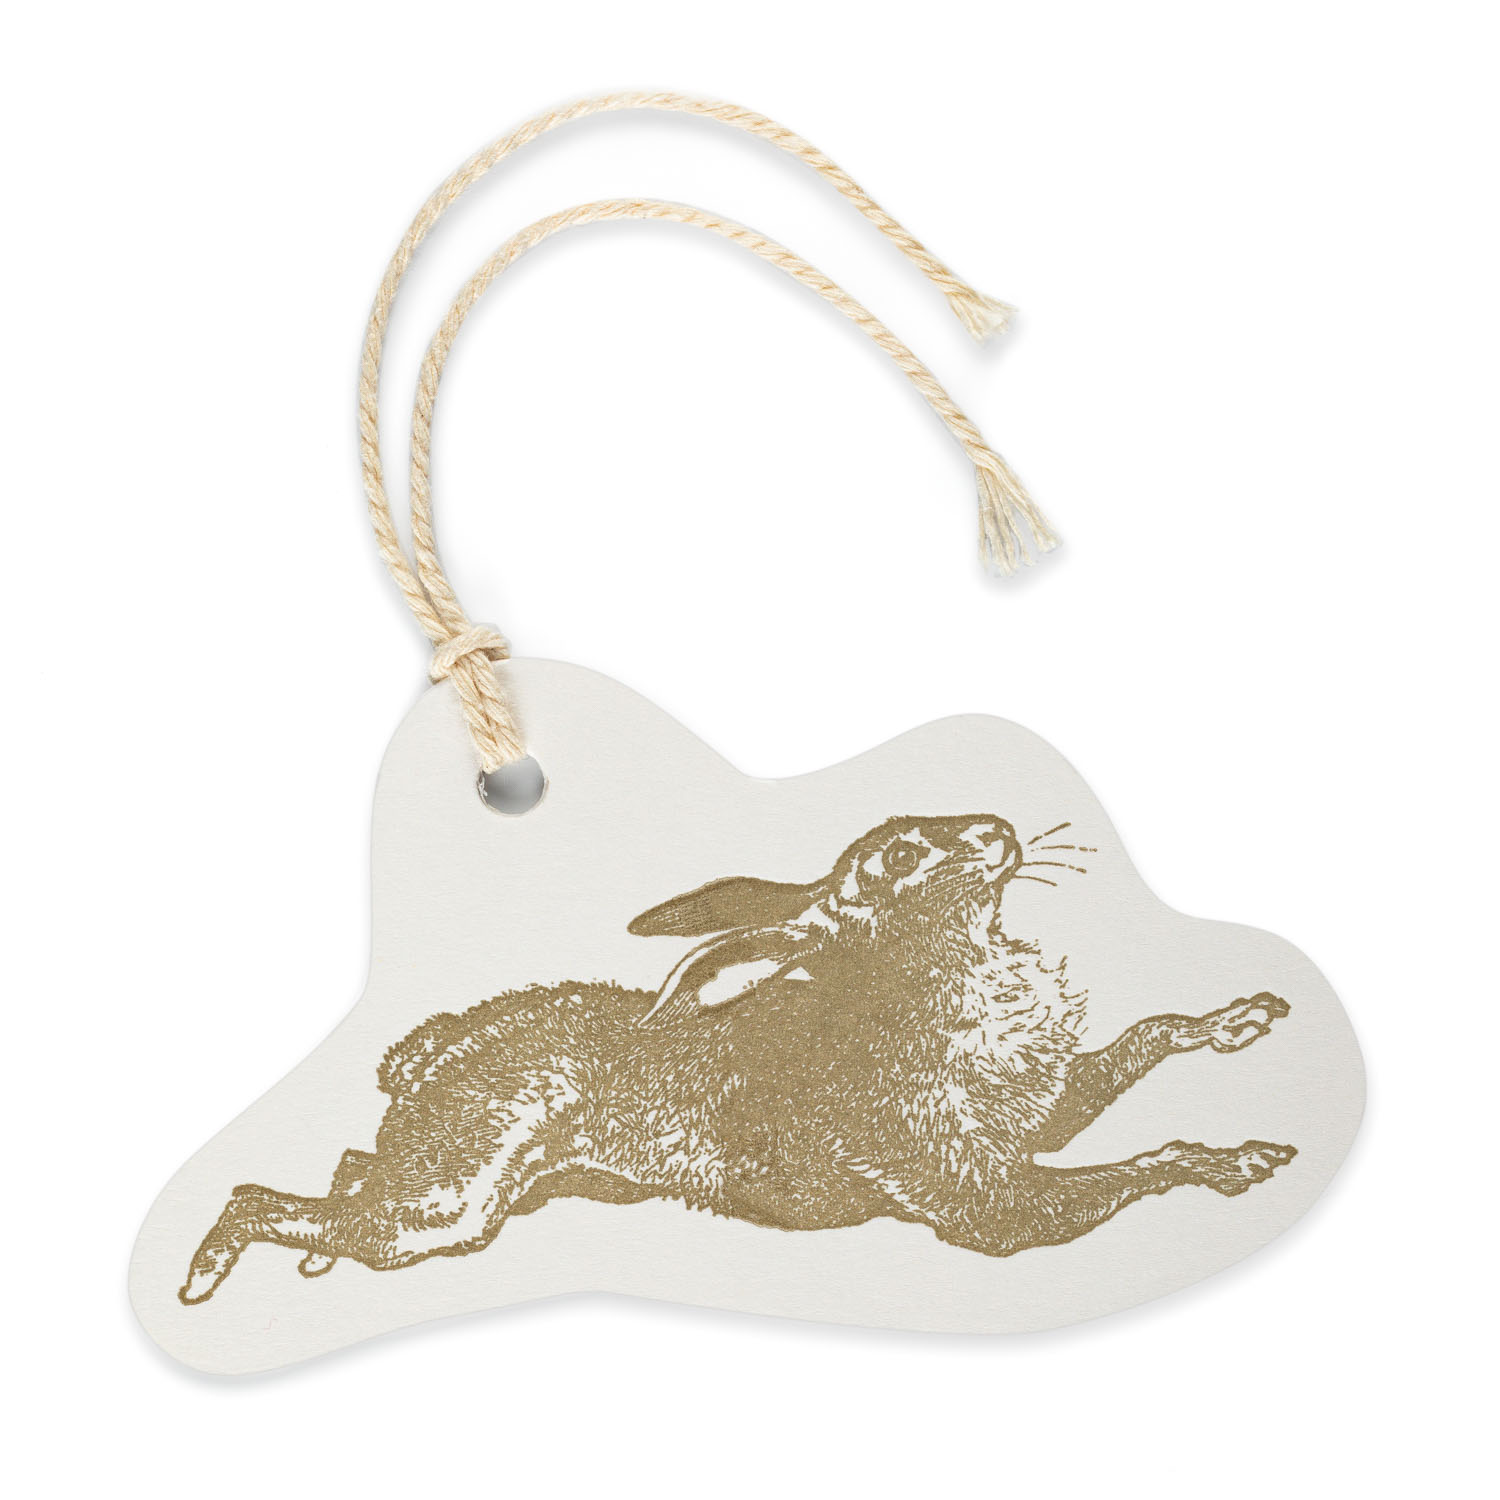 Hare Tag - Gift tags - Jason Falkner - from Archivist Gallery 